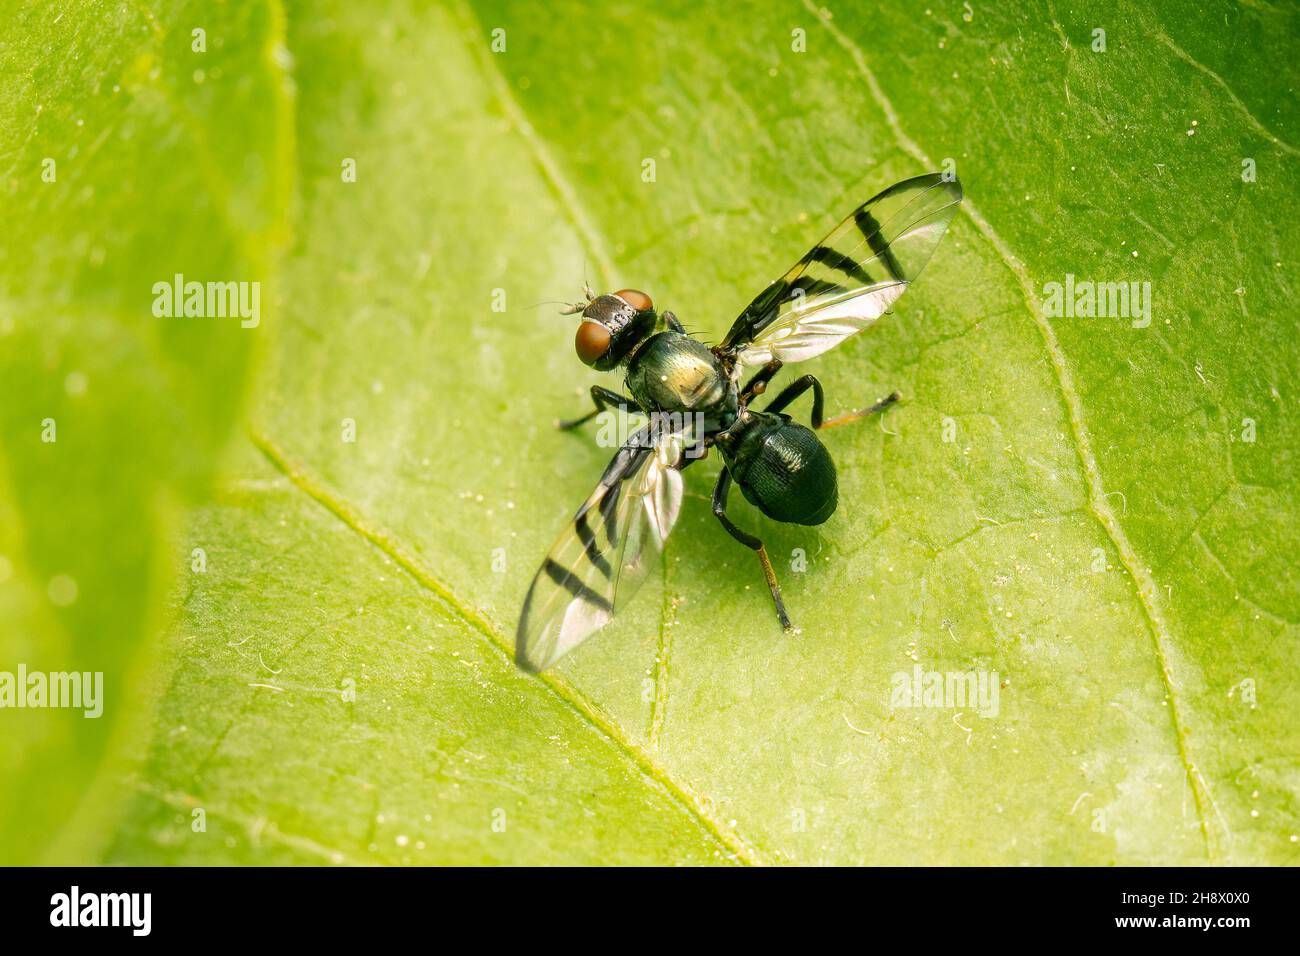 Very small fly on a green leaf with copy space Stock Photo